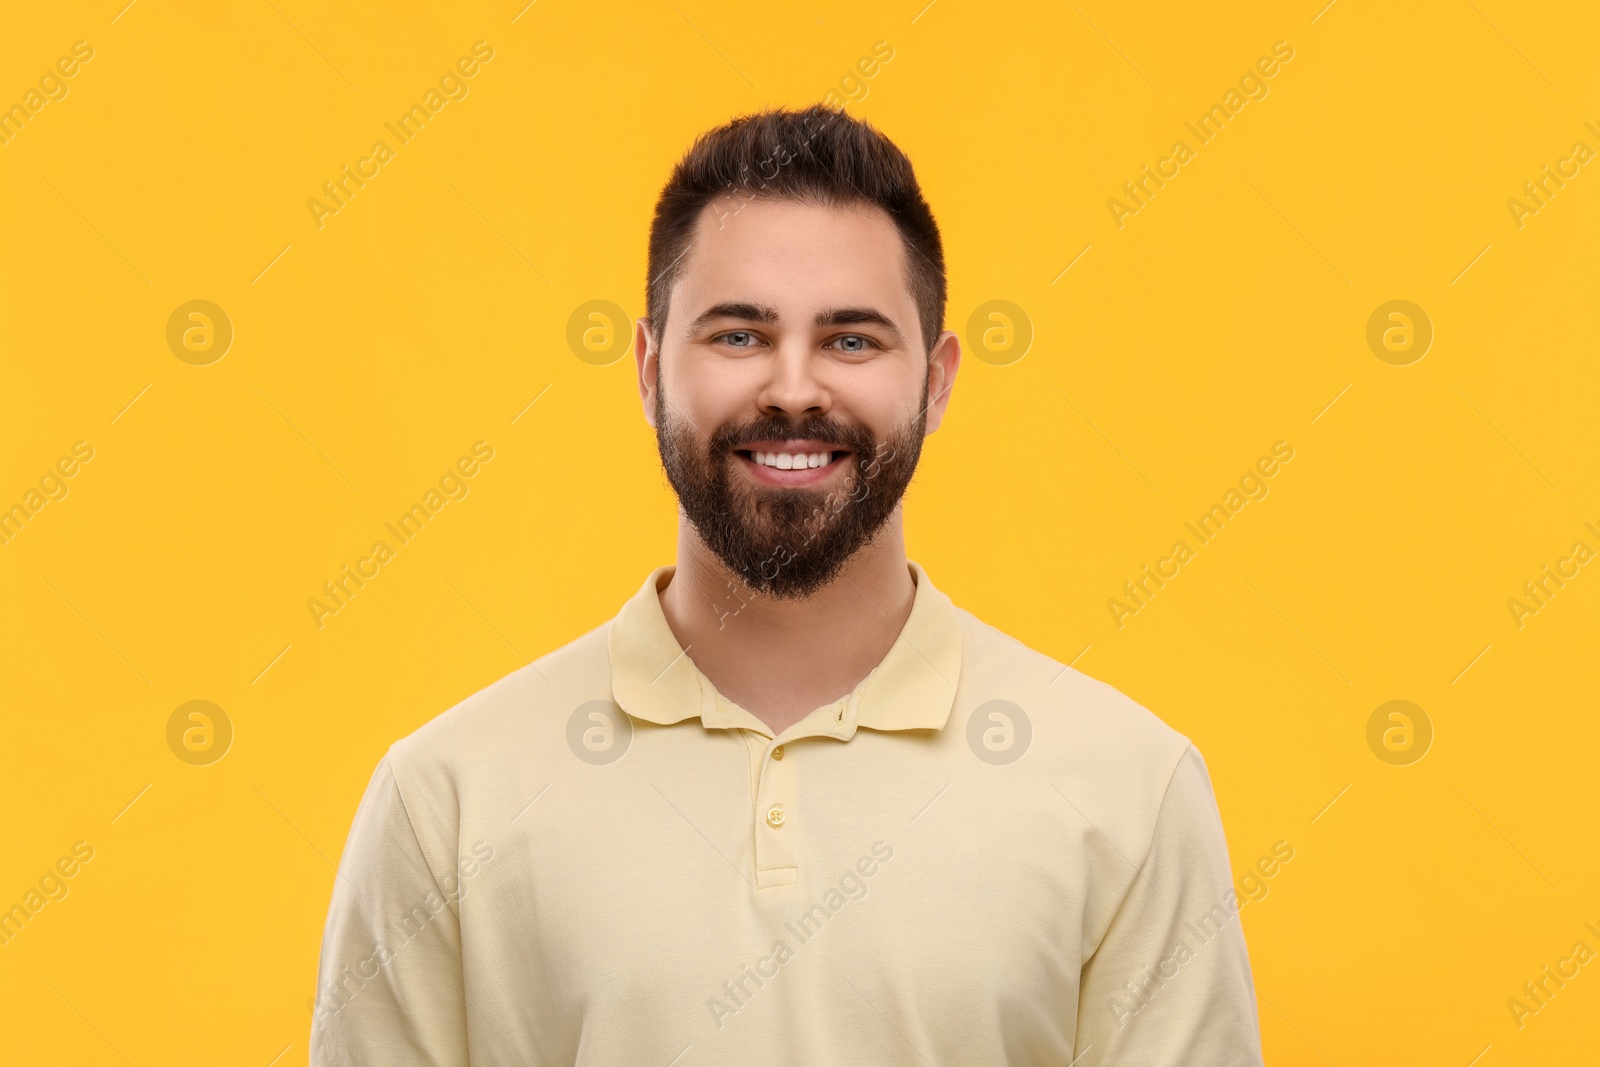 Photo of Man with clean teeth smiling on yellow background